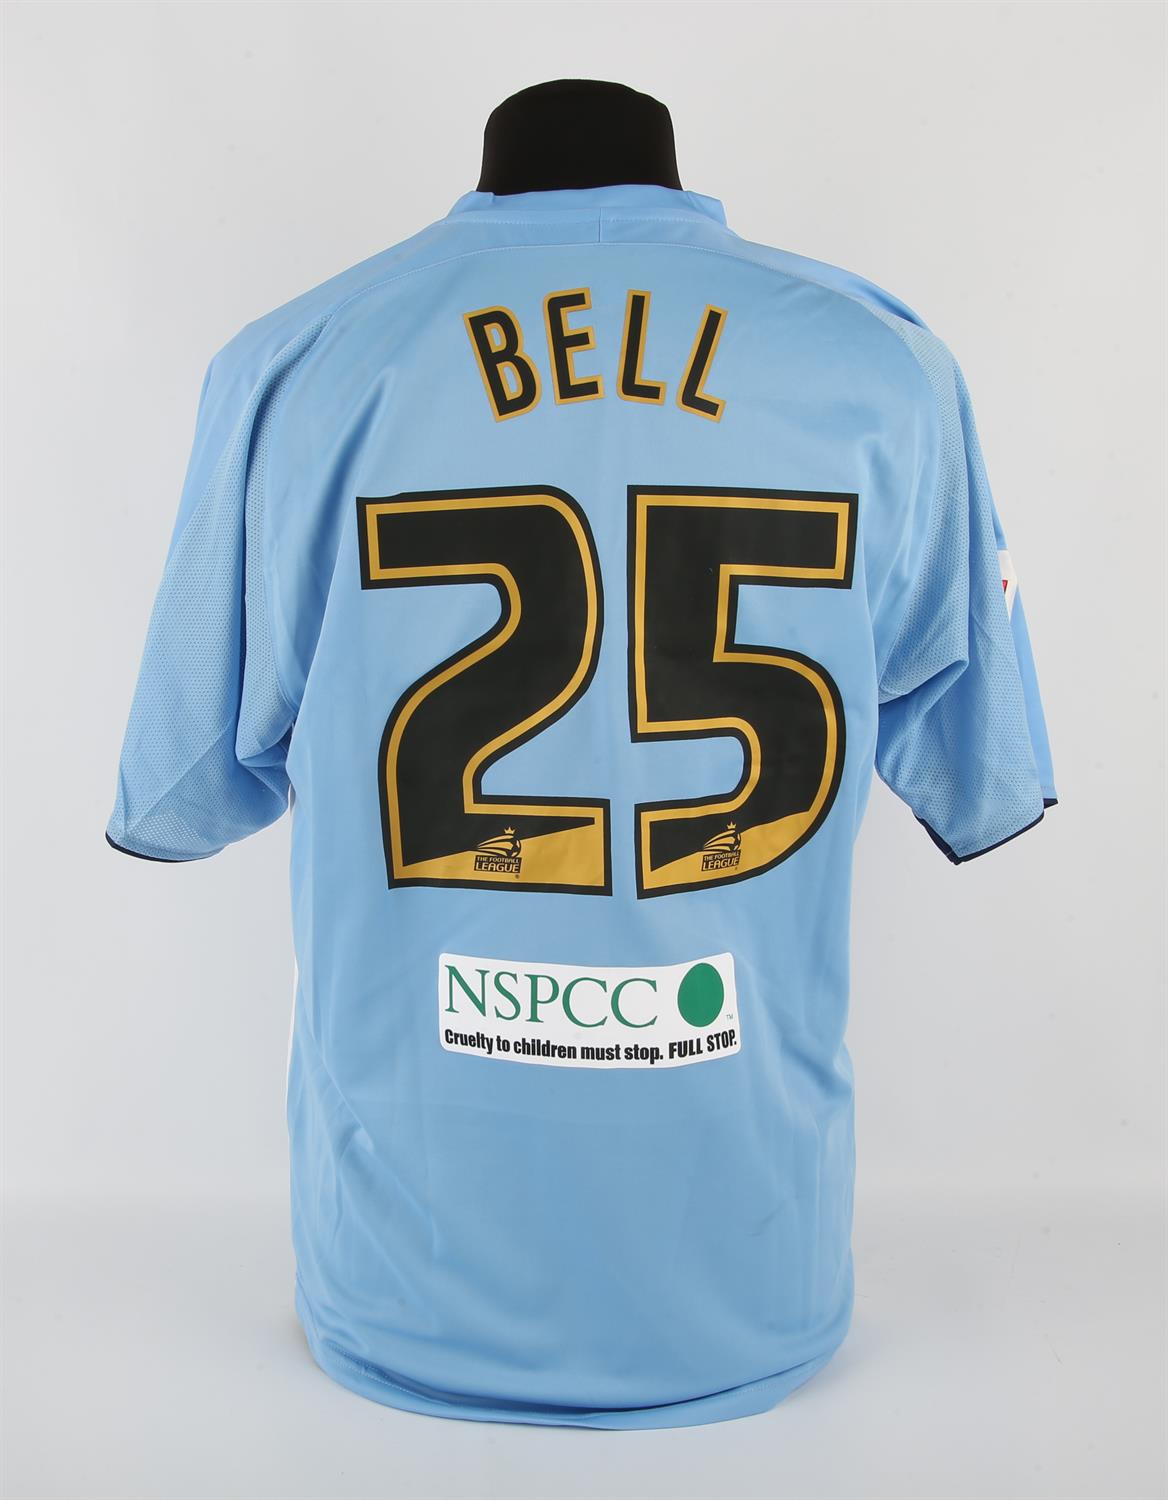 Coventry City Football club, David Bell (No.25) 125th Anniversary shirt from 2008-2009, S/S signed. - Image 2 of 2